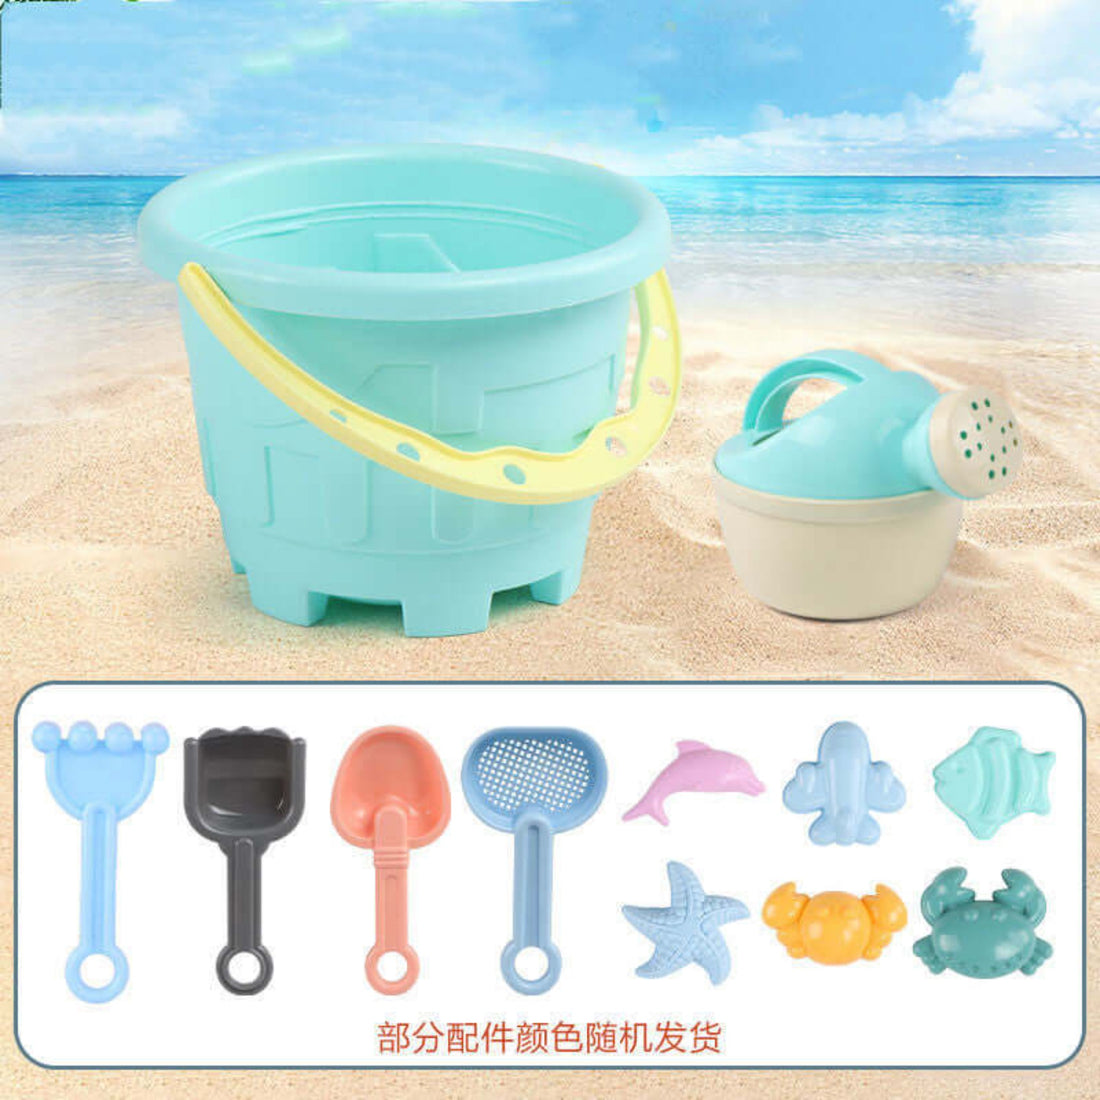 Animal-shaped molds for sand play